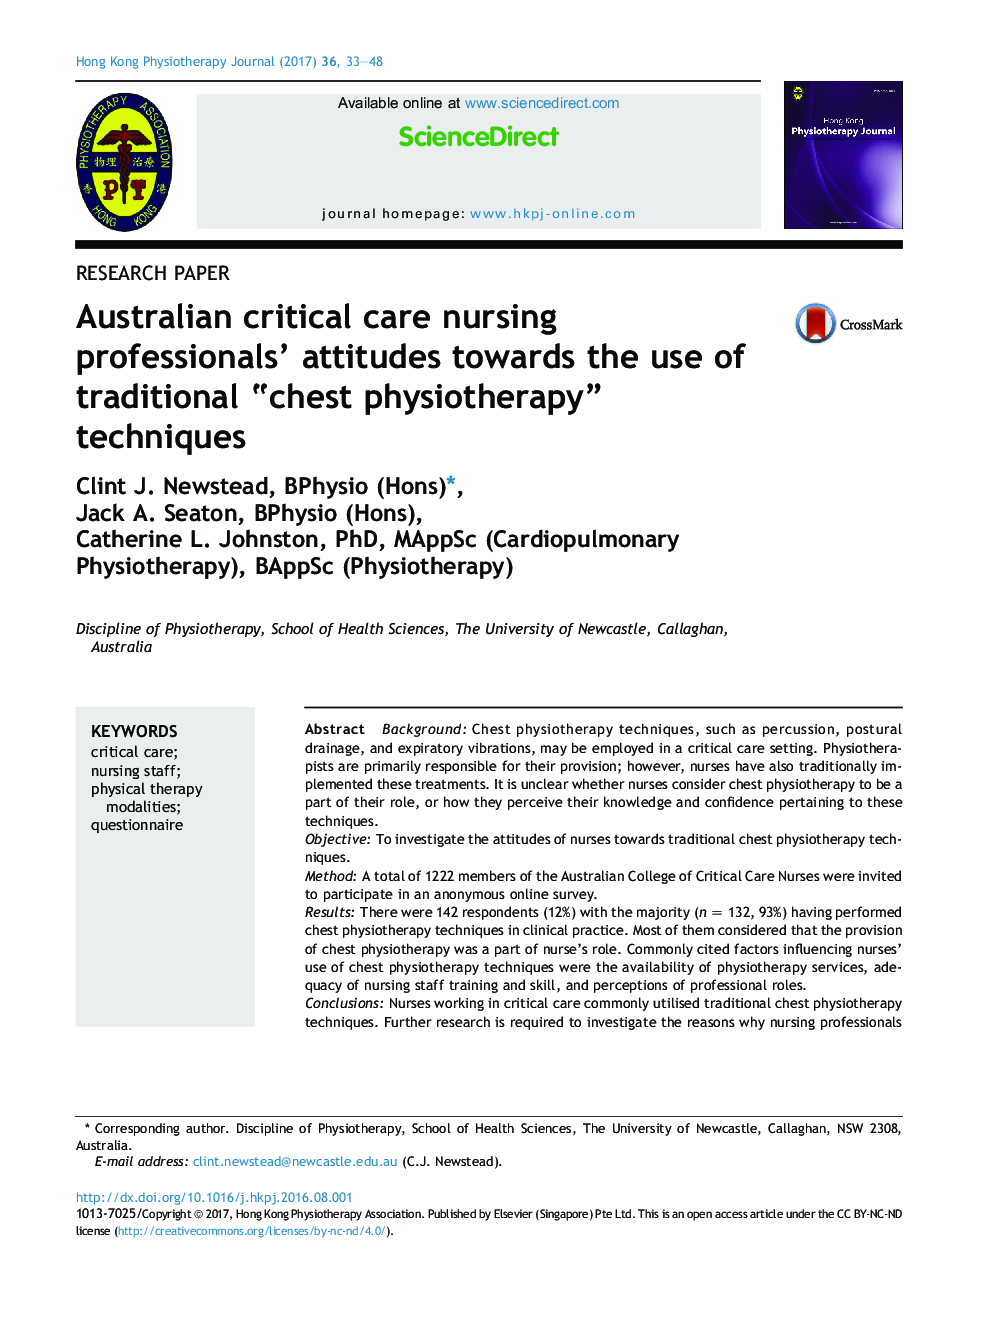 Australian critical care nursing professionals' attitudes towards the use of traditional “chest physiotherapy” techniques